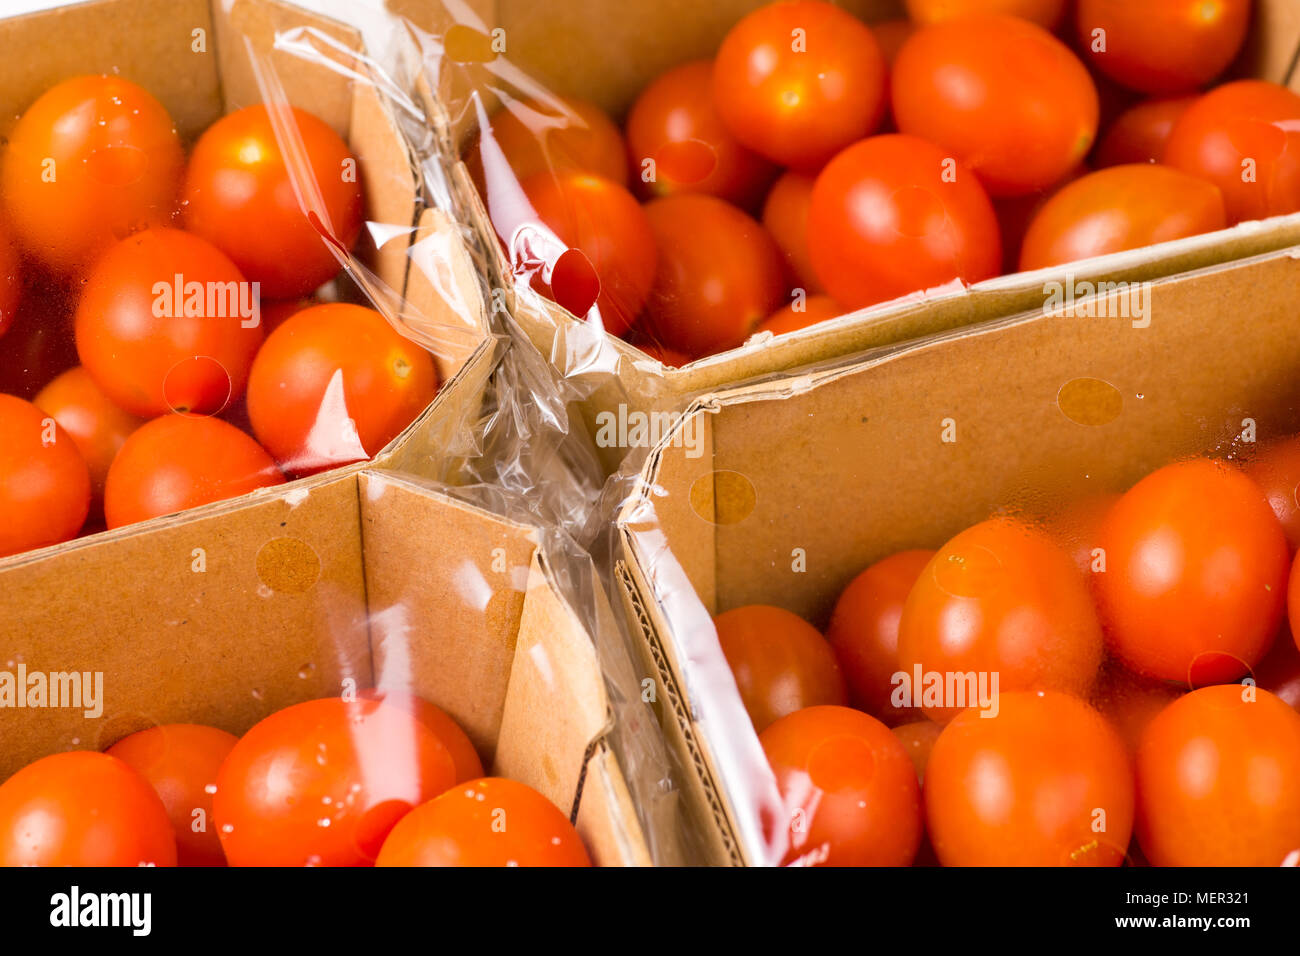 ripe cherry tomatoes packages in box and plastic close up and isolated on white background Stock Photo